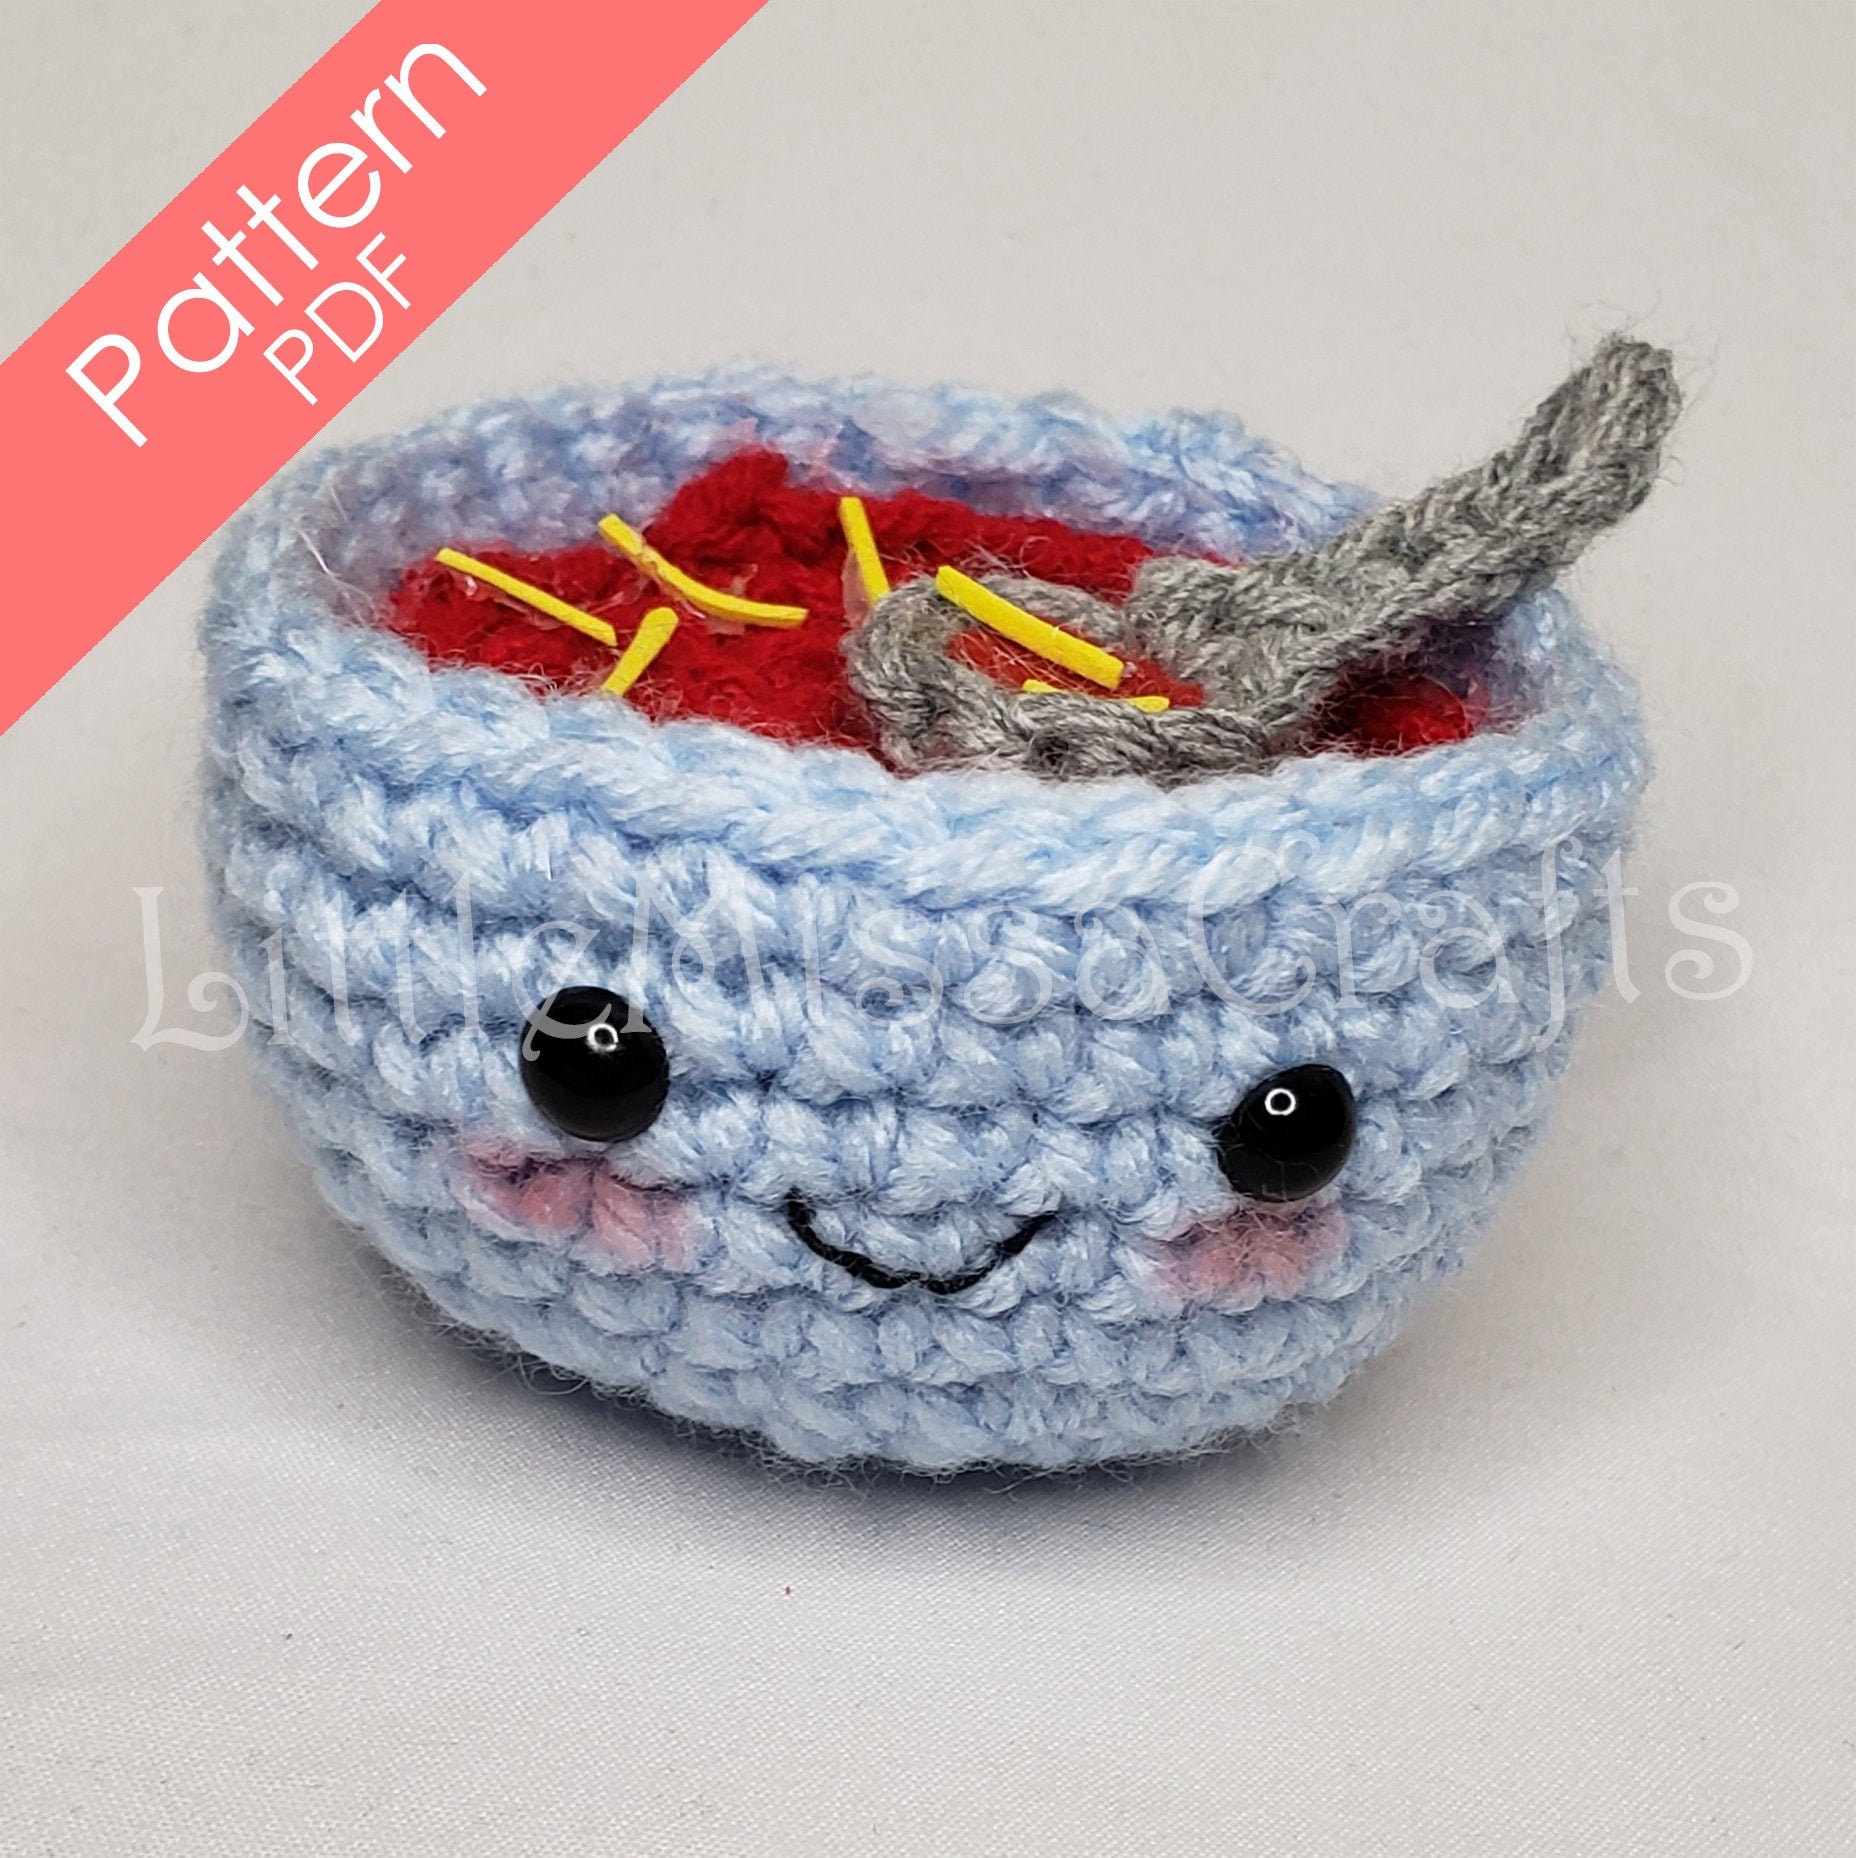 Food theme Crochet Plushies-Small-Bowl Of Cereal - Stuffed Animals